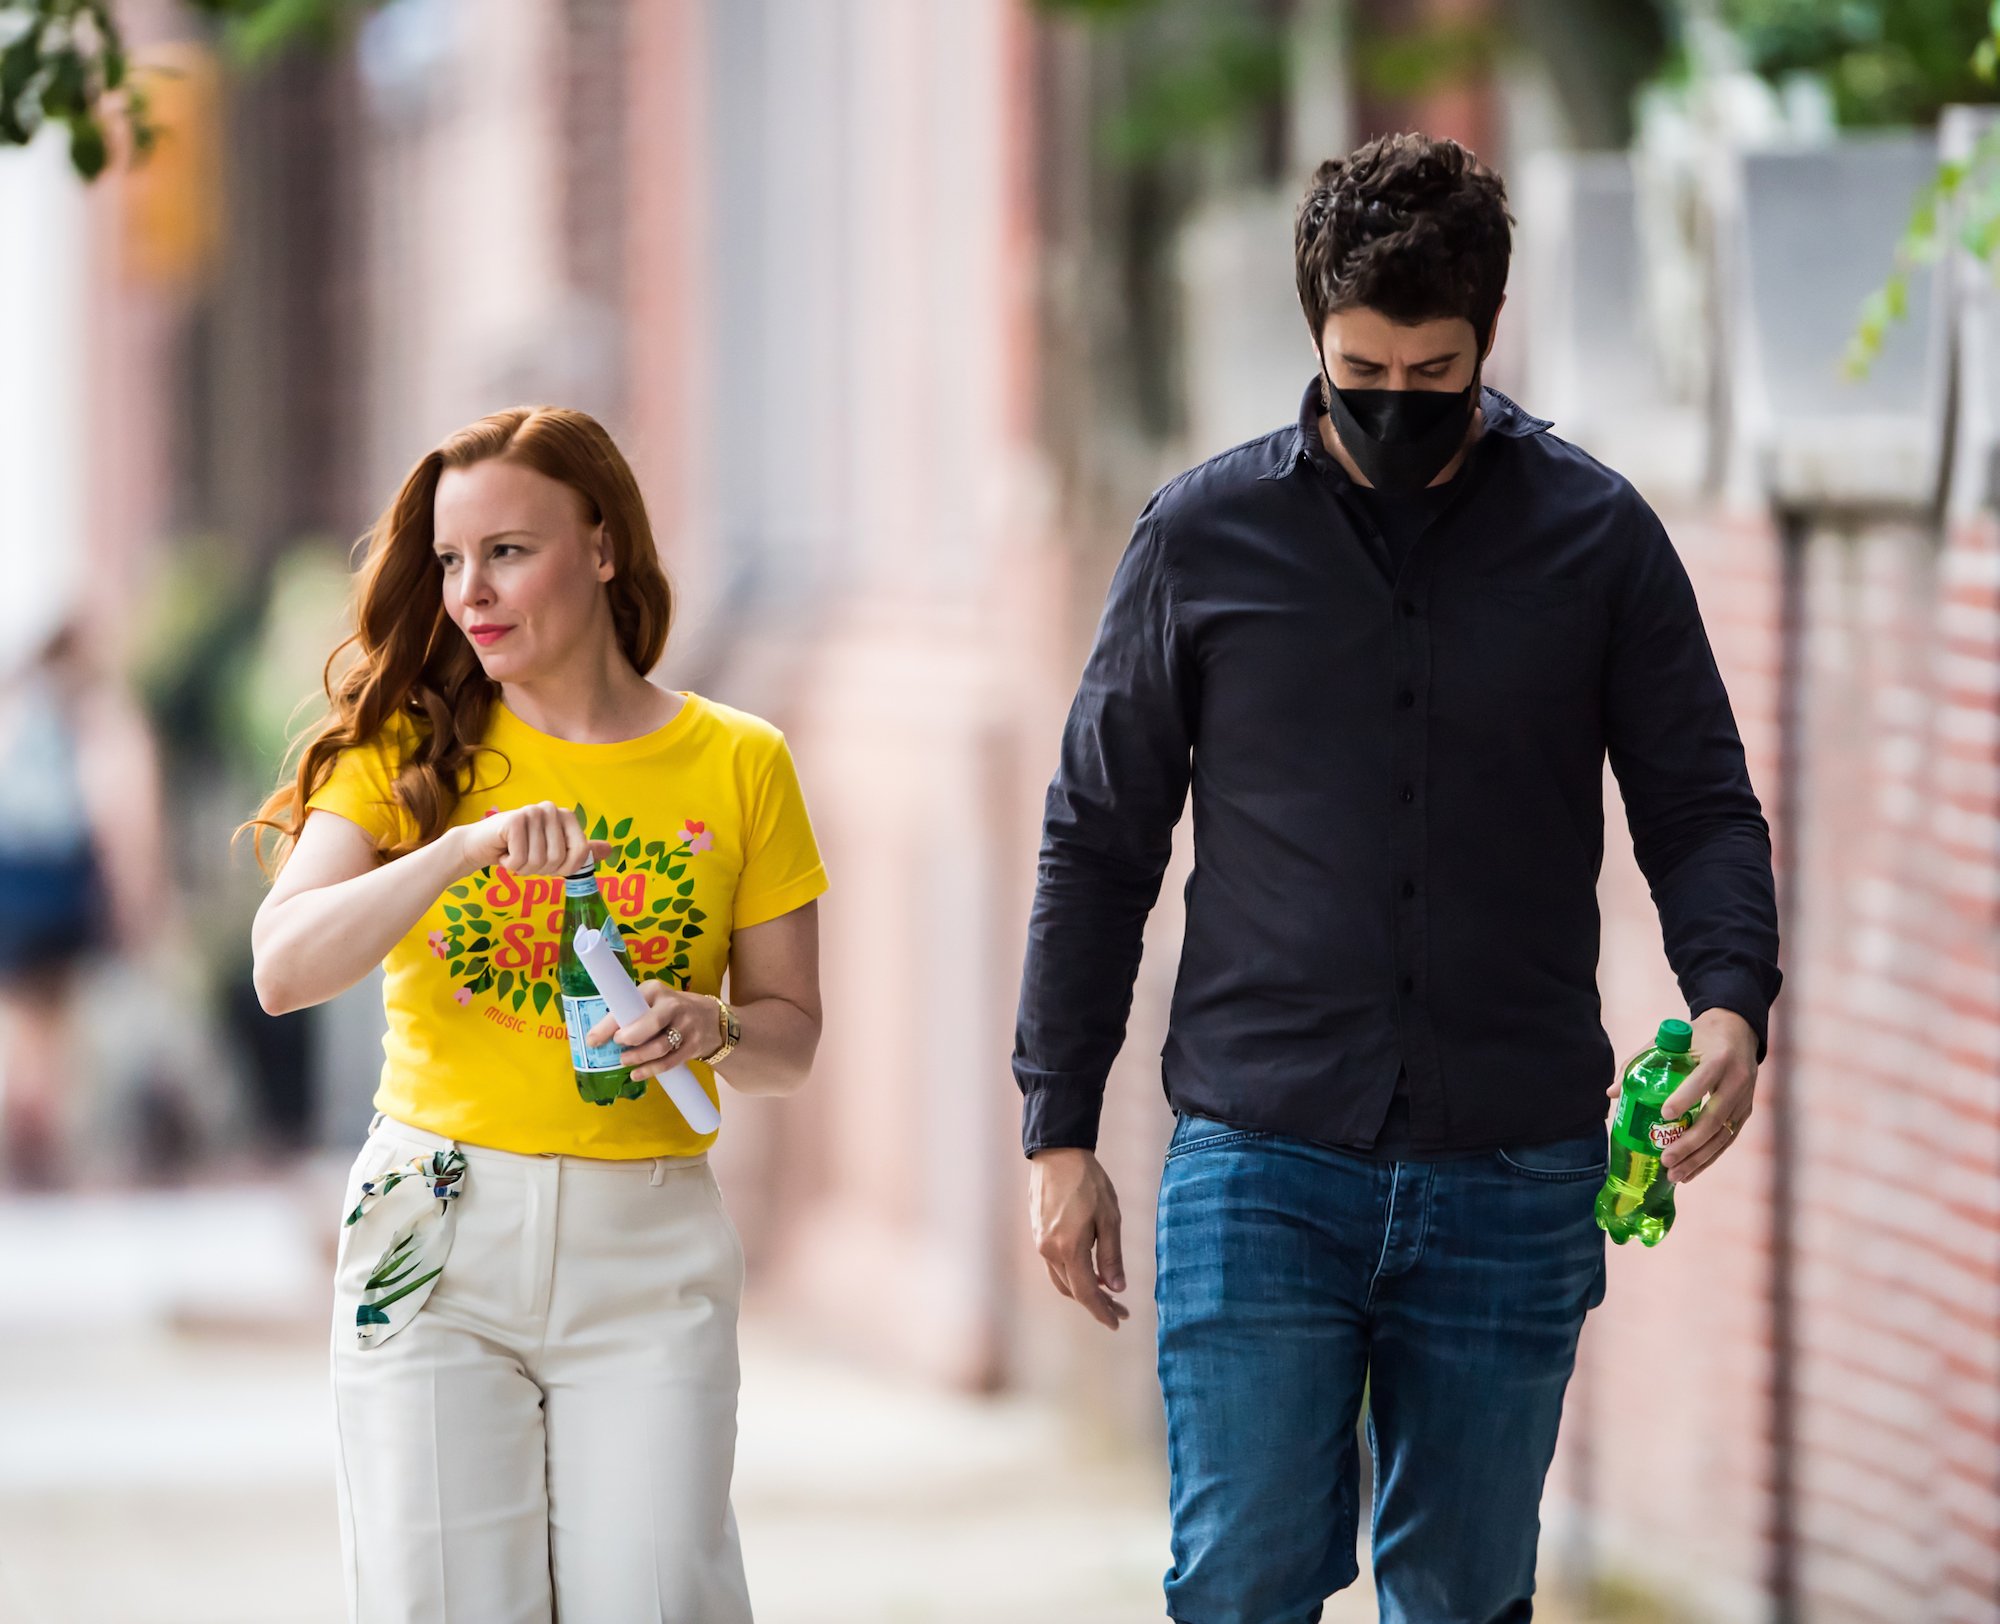 'Servant' Season 3 stars Lauren Ambrose in a yellow tshirt and white pants walking with Toby Kebbell in a dark shirt in jeans, on a street in Philadelphia